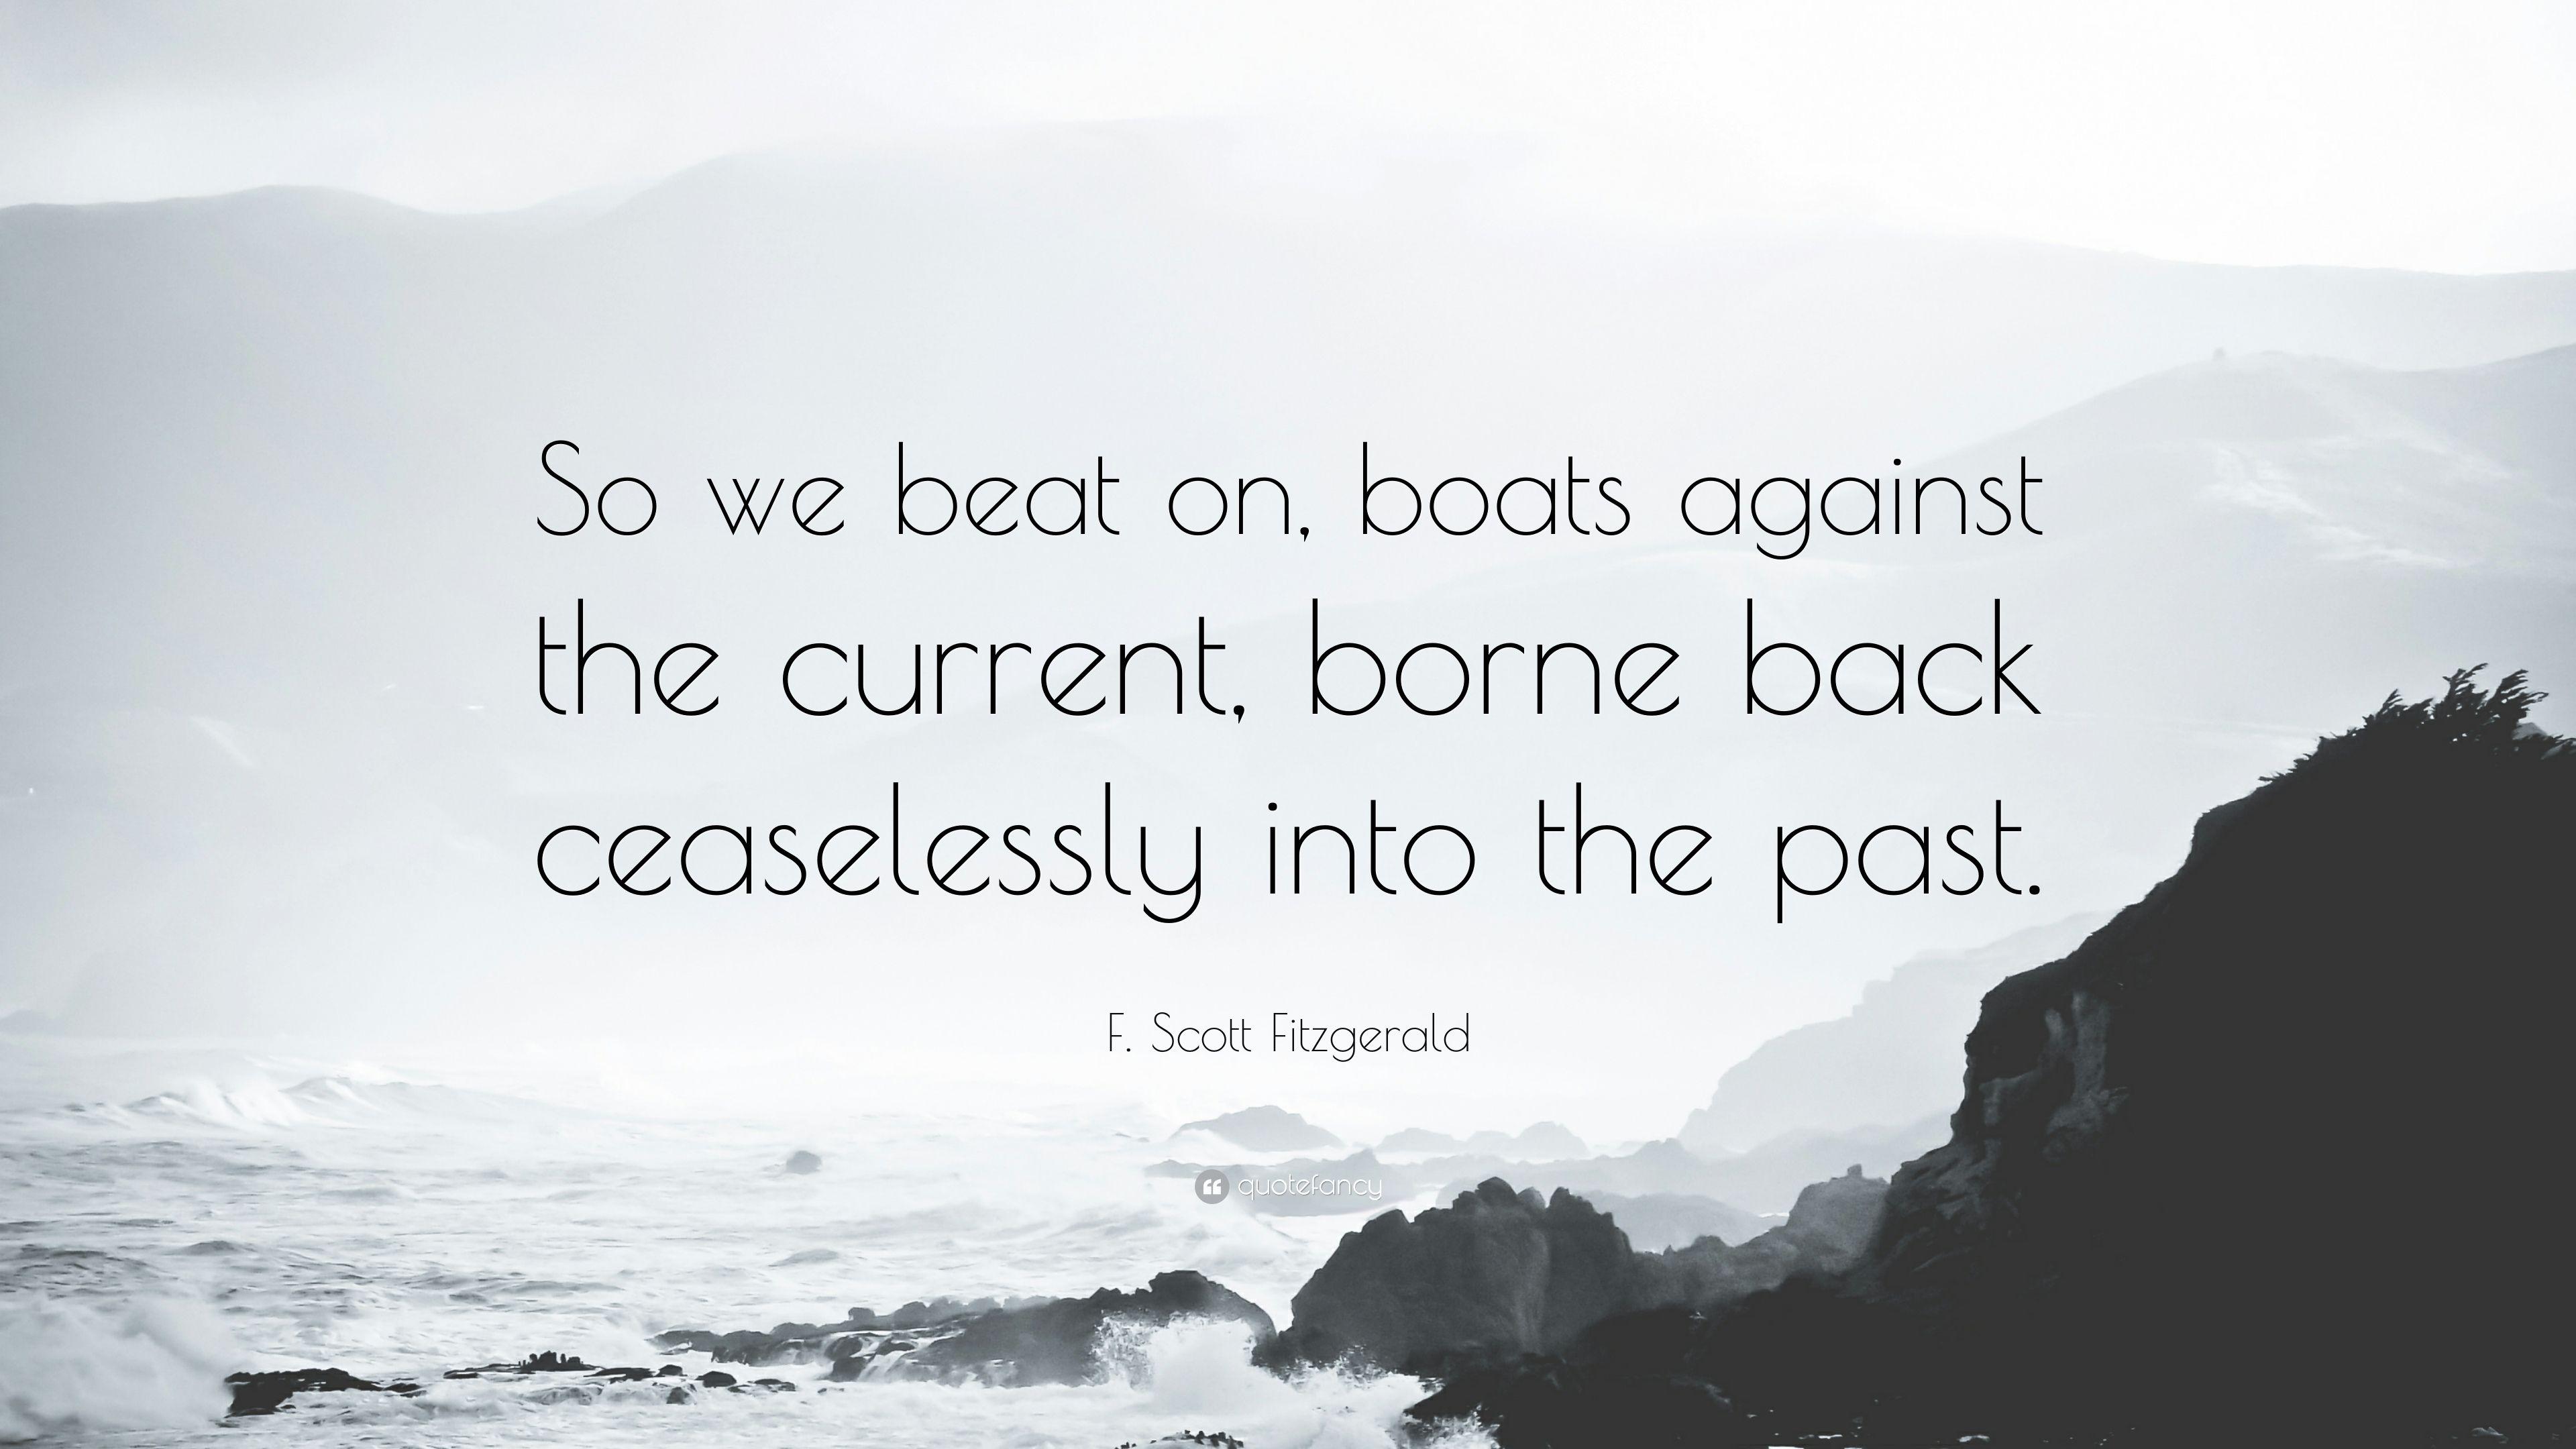 F. Scott Fitzgerald Quote: “So we beat on, boats against